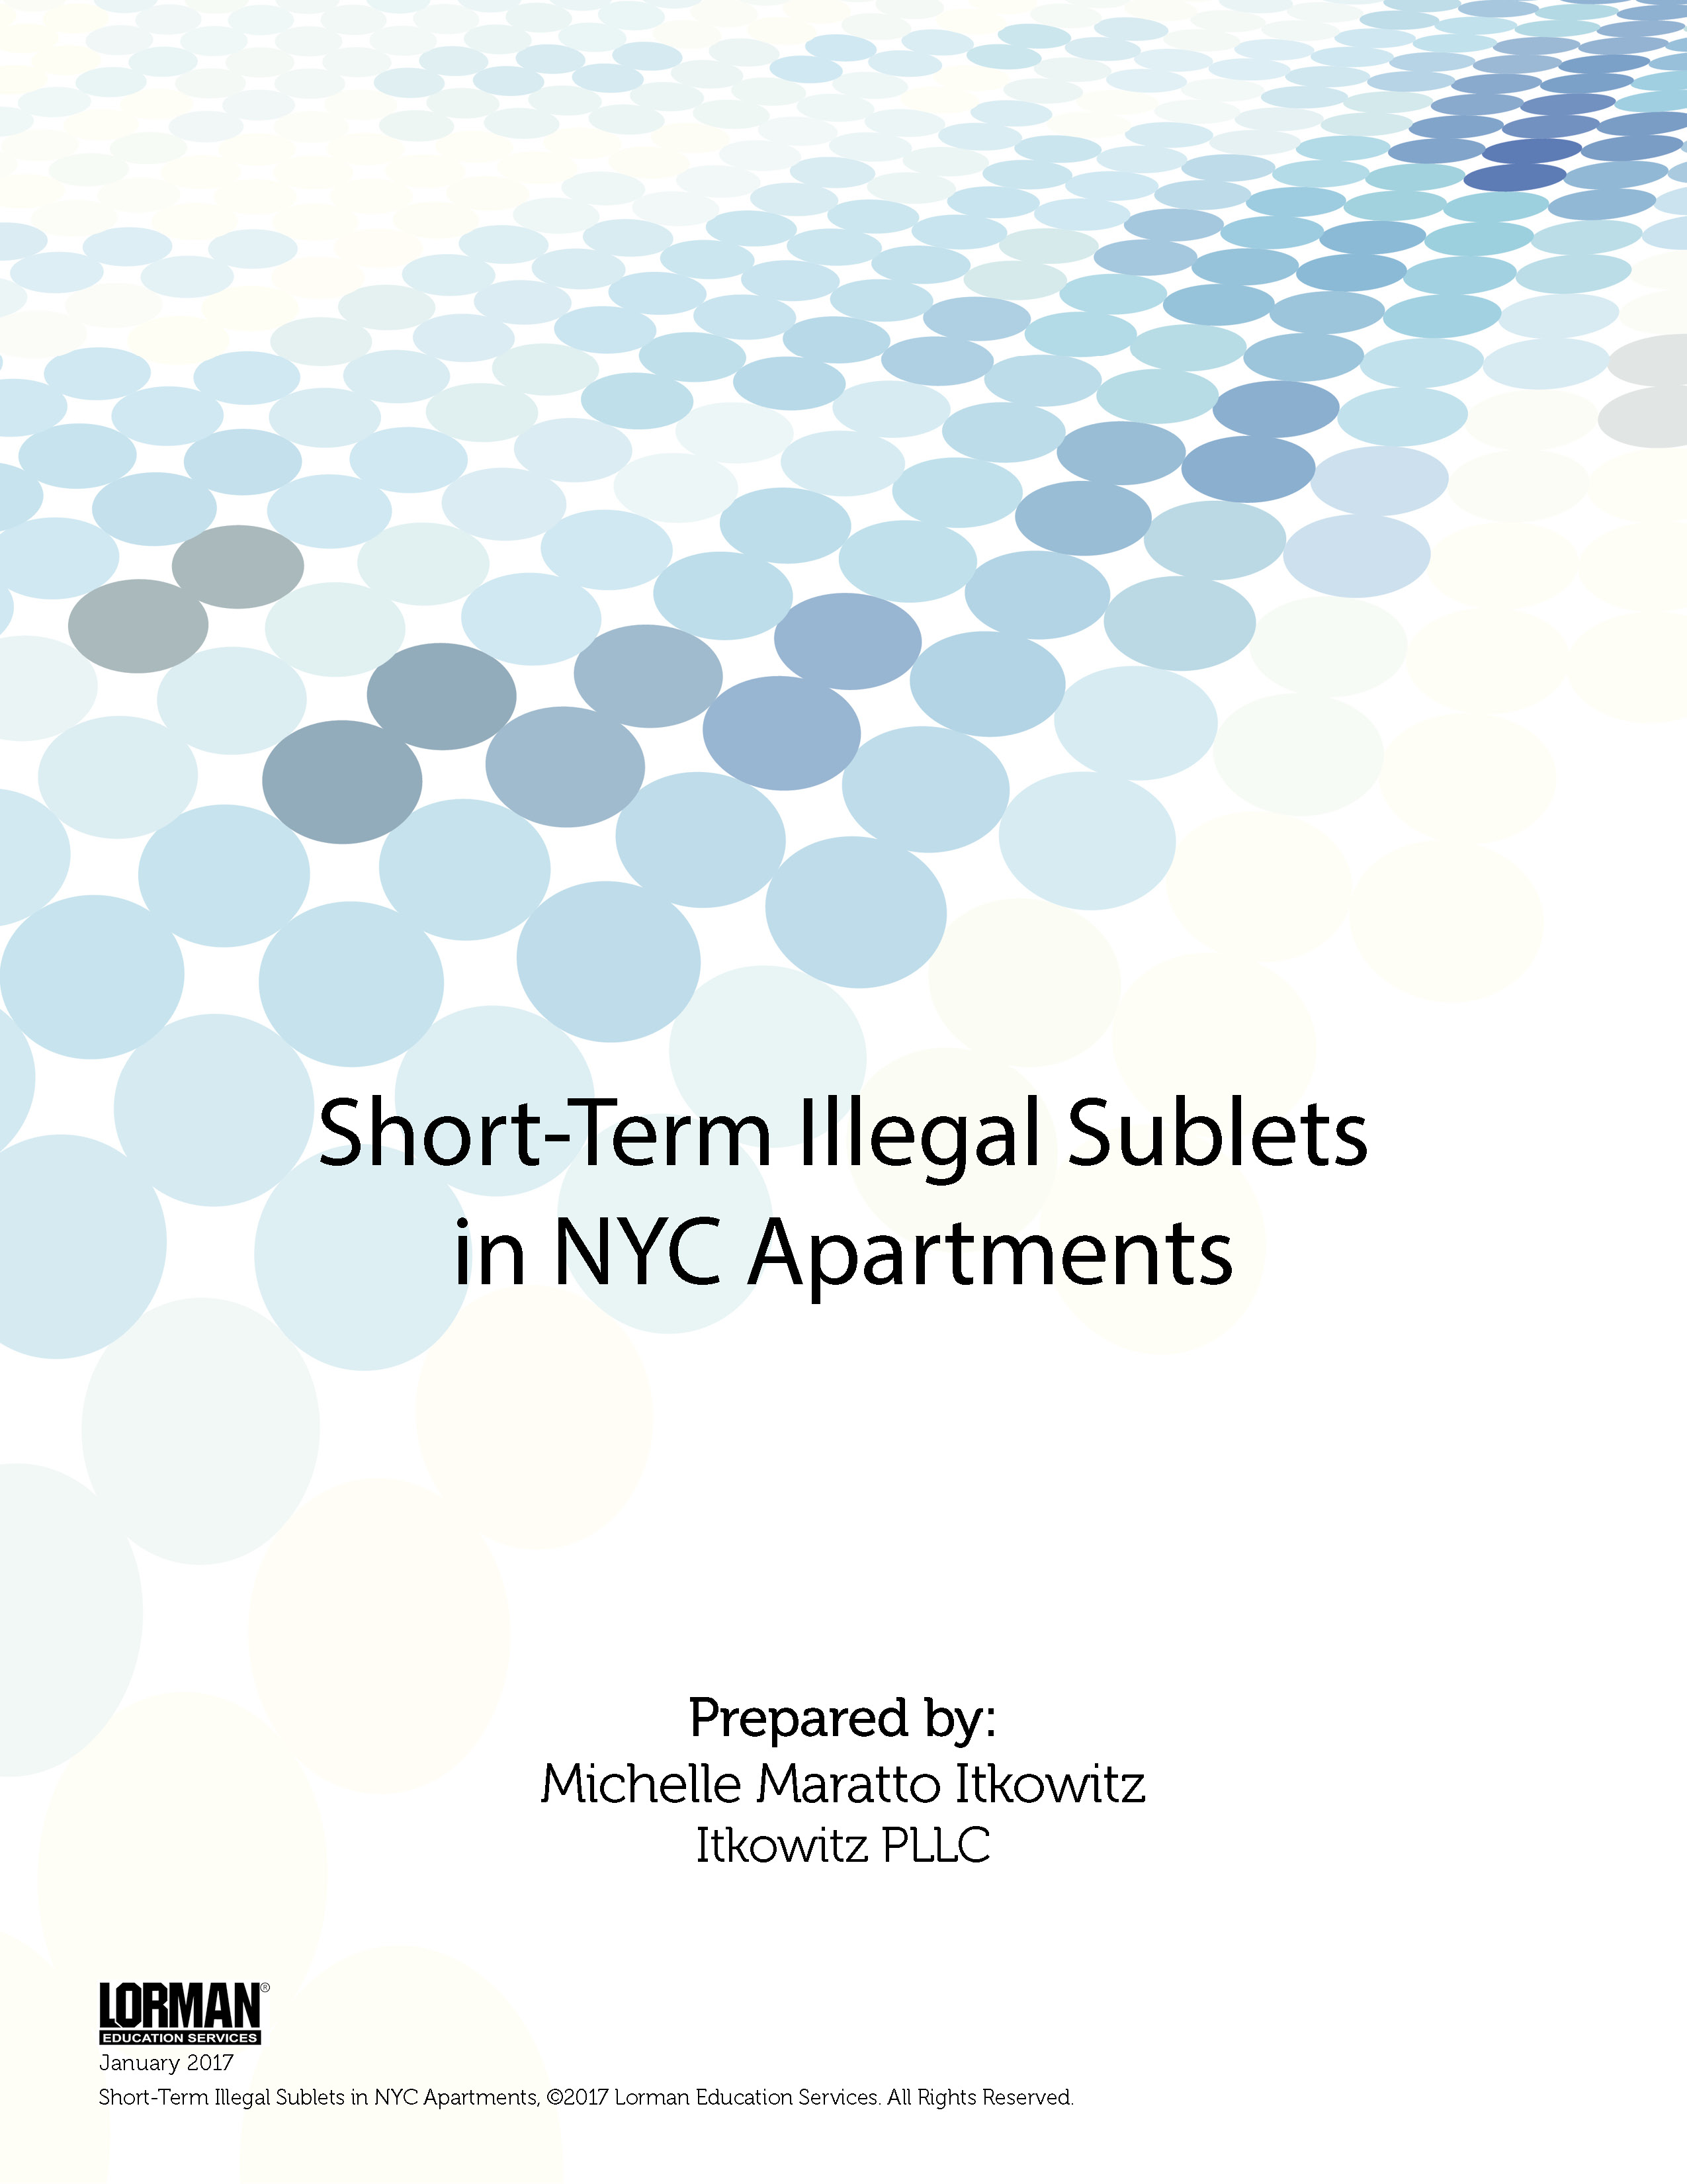 Short-Term Illegal Sublets in NYC Apartments